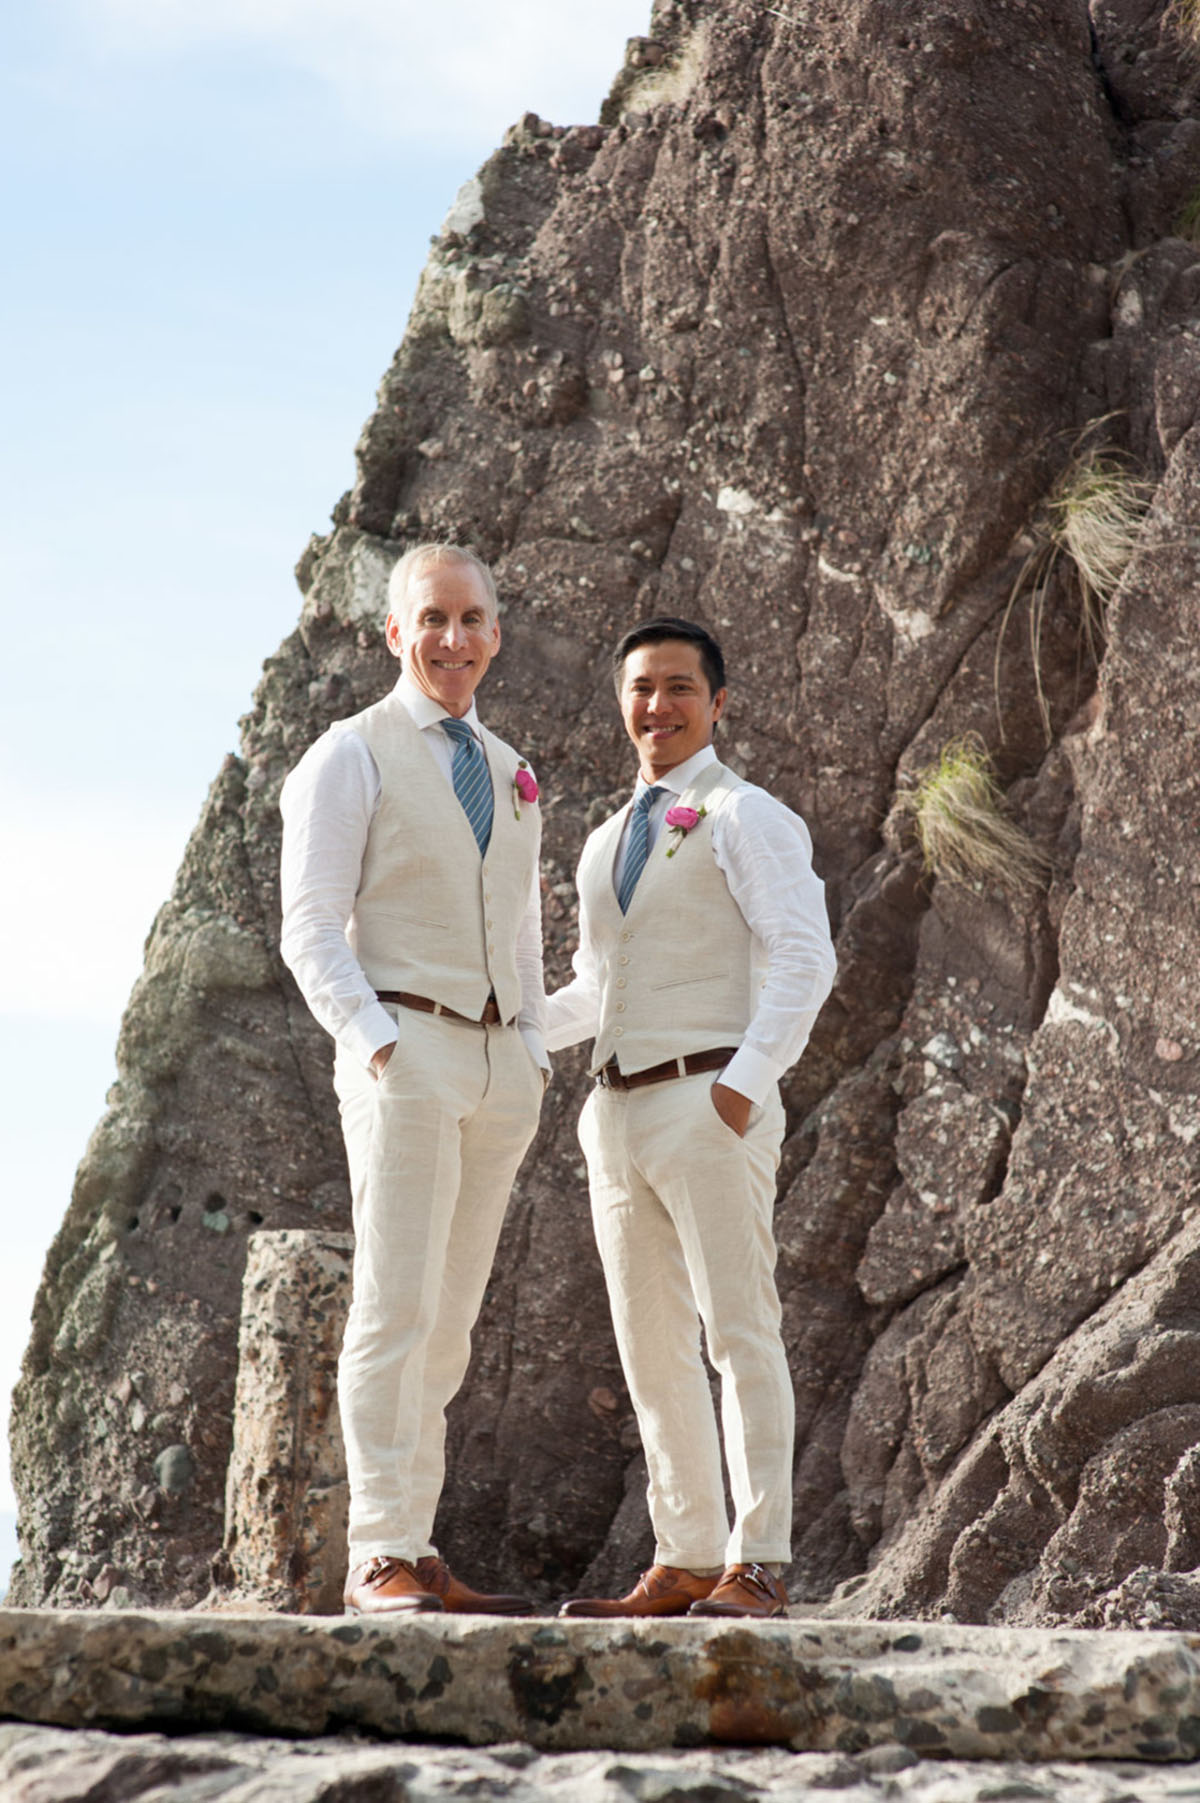 Tropical destination white beach wedding in Puerto Vallarta, Mexico two grooms linen tailored suits tradition whimsical